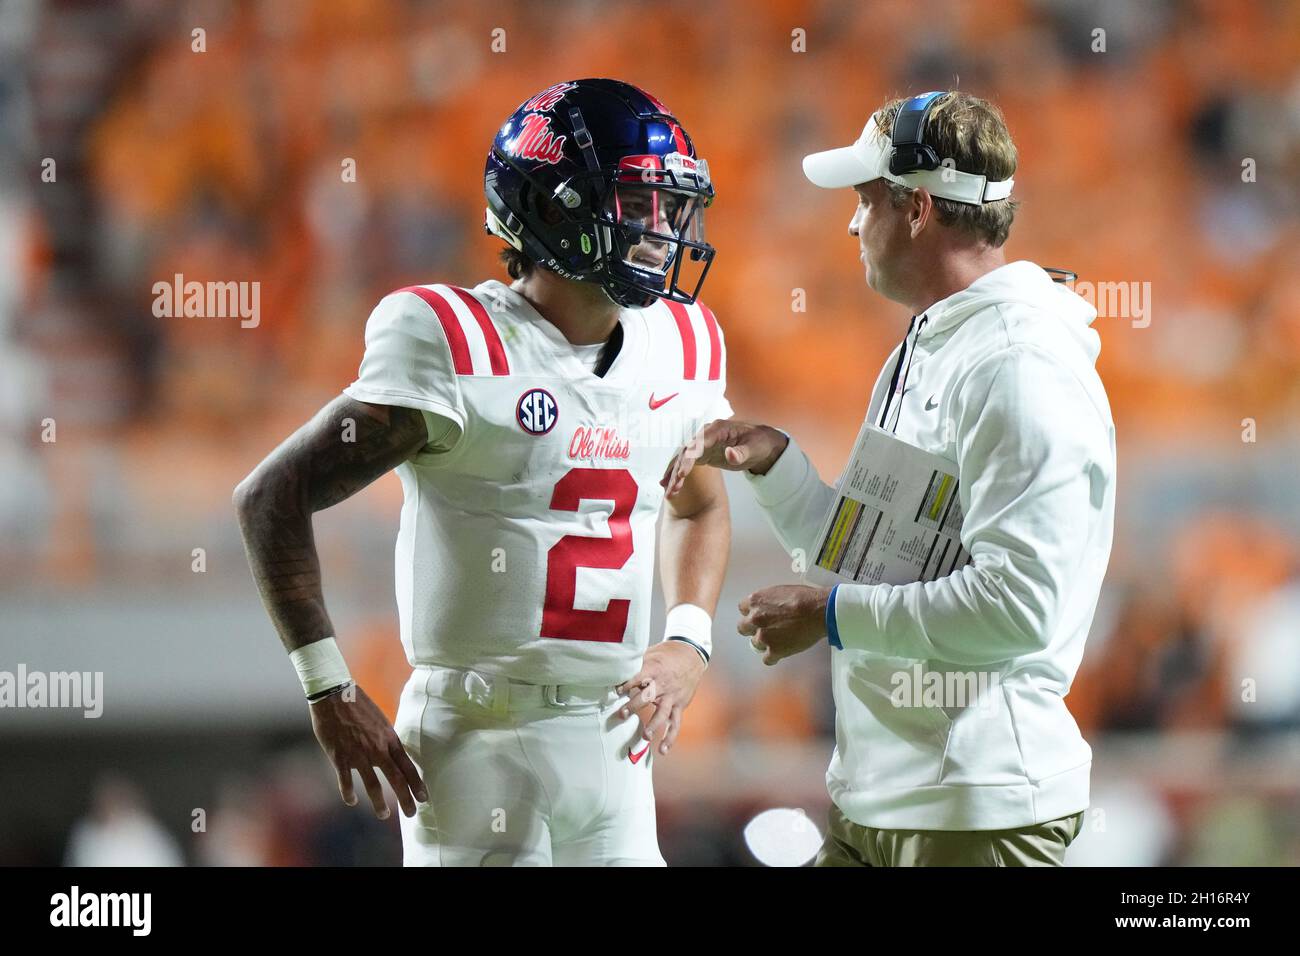 October 16, 2021: head coach Lane Kiffin speaks with Matt Corral #2 of the Mississippi Rebels during the NCAA football game between the University of Tennessee Volunteers and the Ole Miss Rebels at Neyland Stadium in Knoxville TN Tim Gangloff/CSM Stock Photo